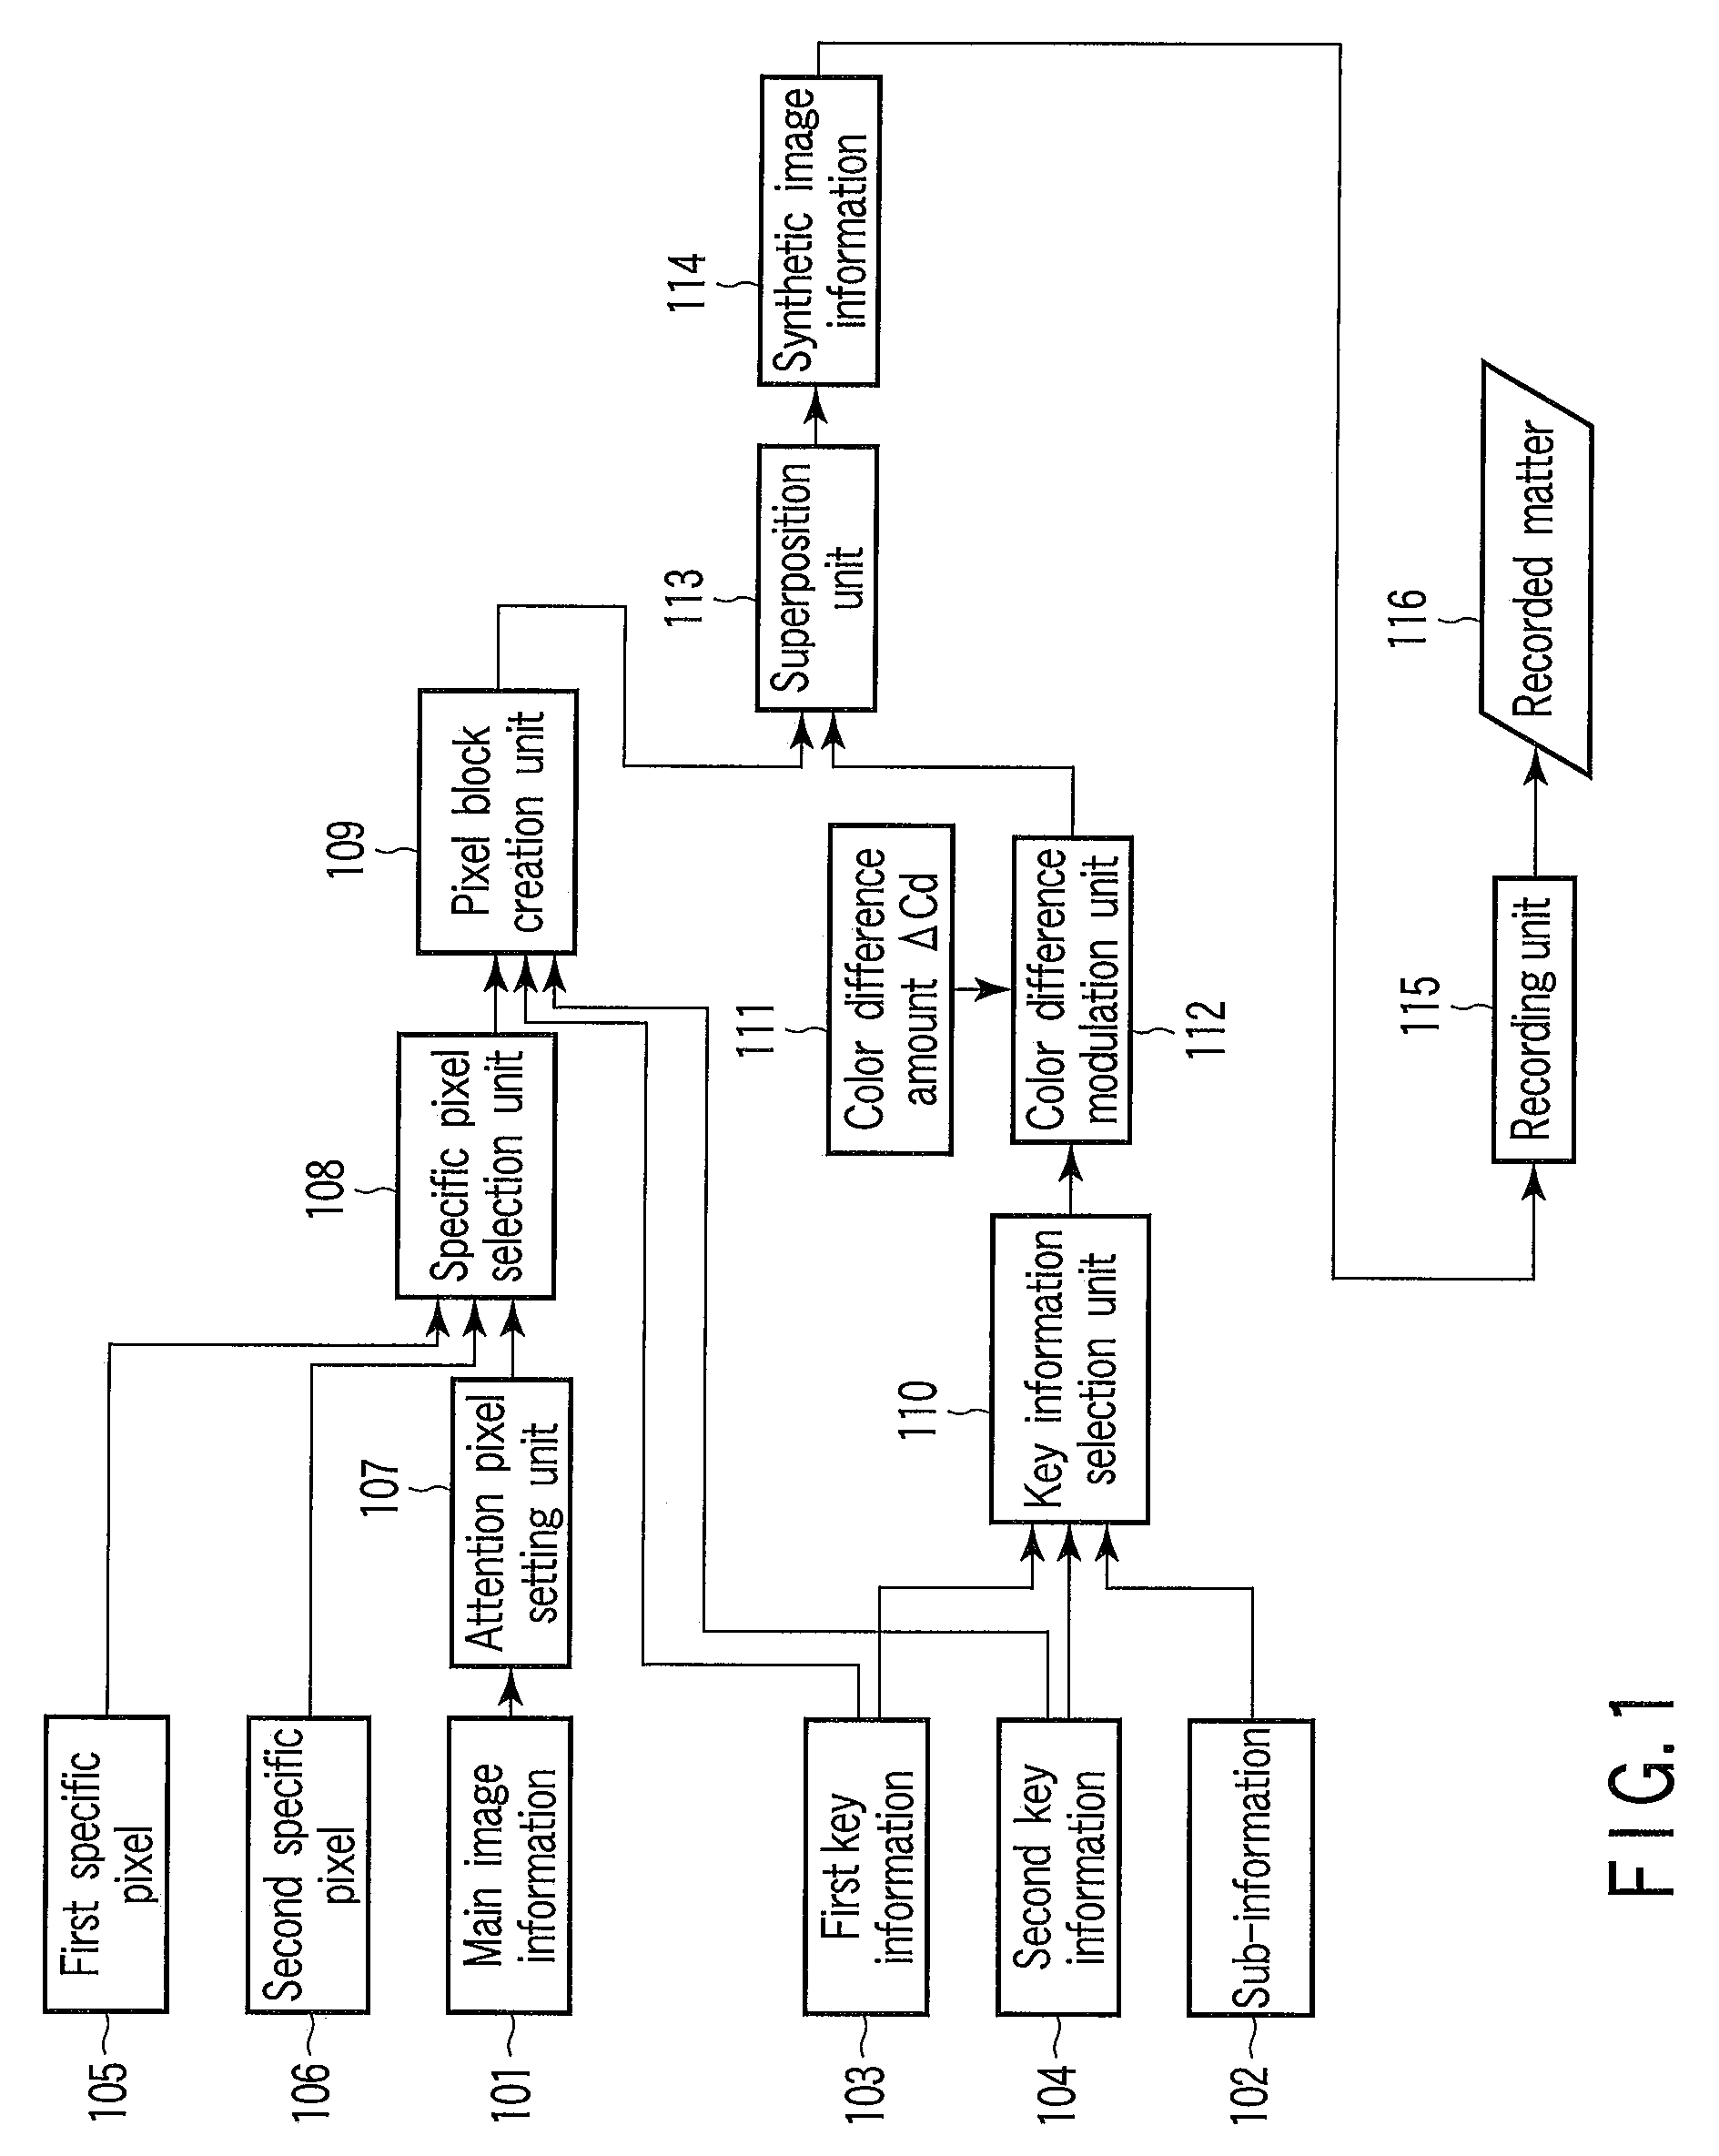 Image processing method and image processing apparatus